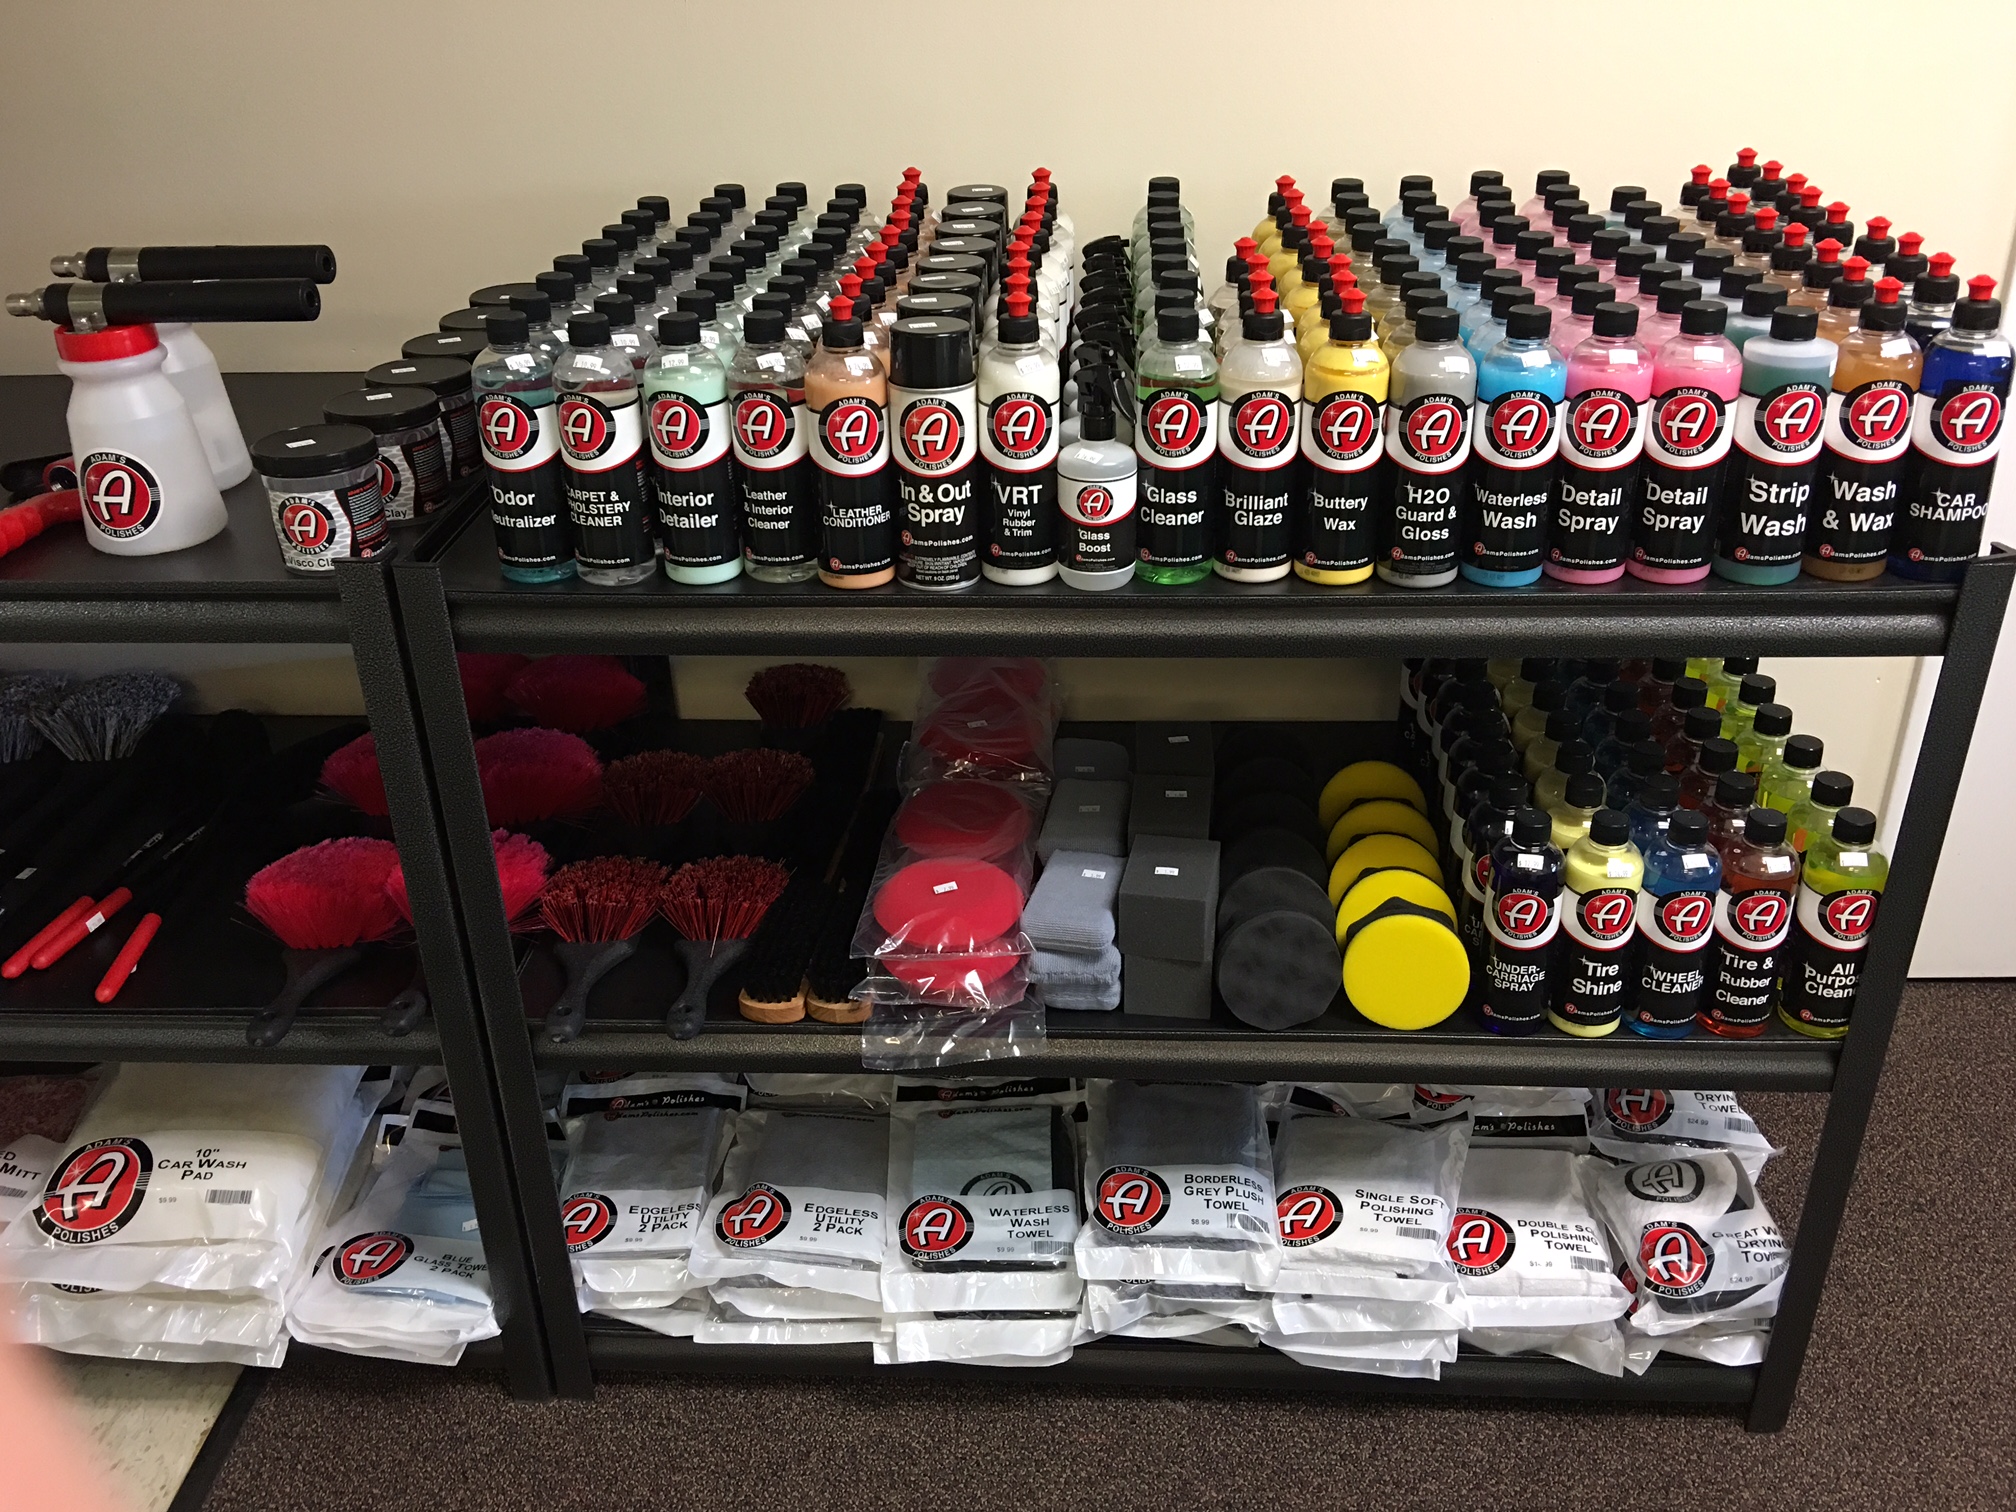 Adam's Polishes Named Official Car Care Product Provider of